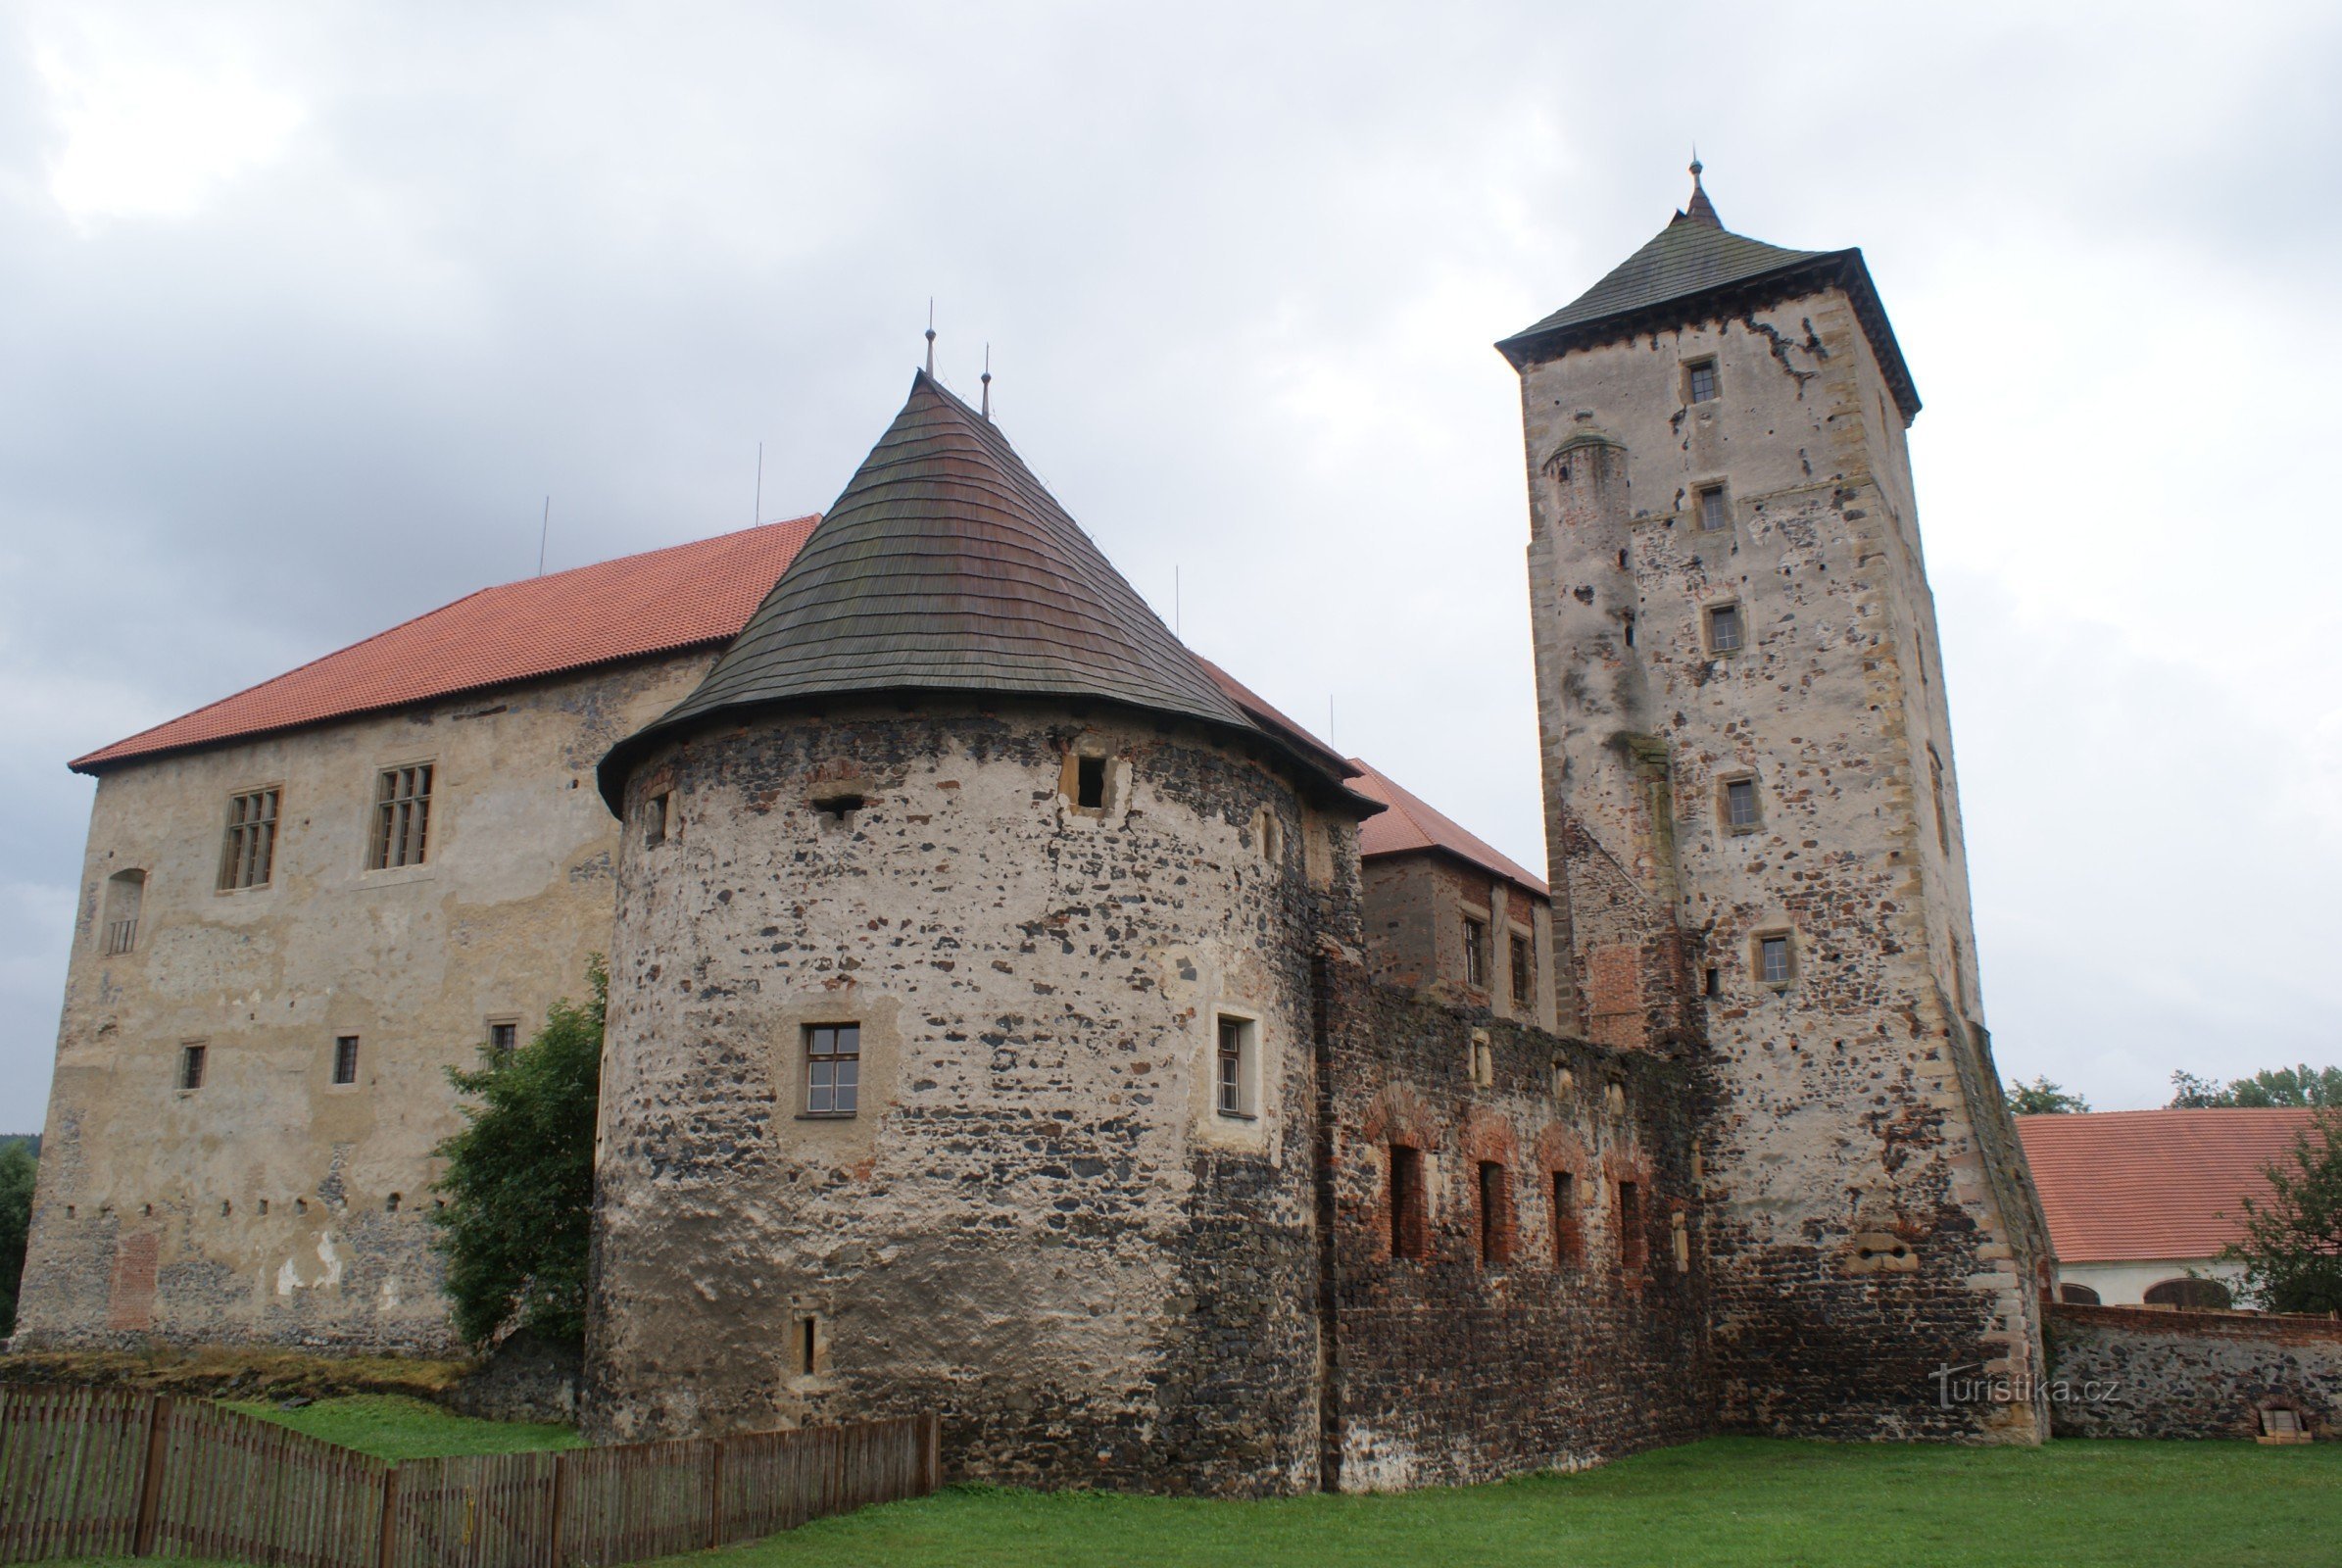 Švihov - a water castle and a pearl of fortification architecture (history and appearance of the castle)